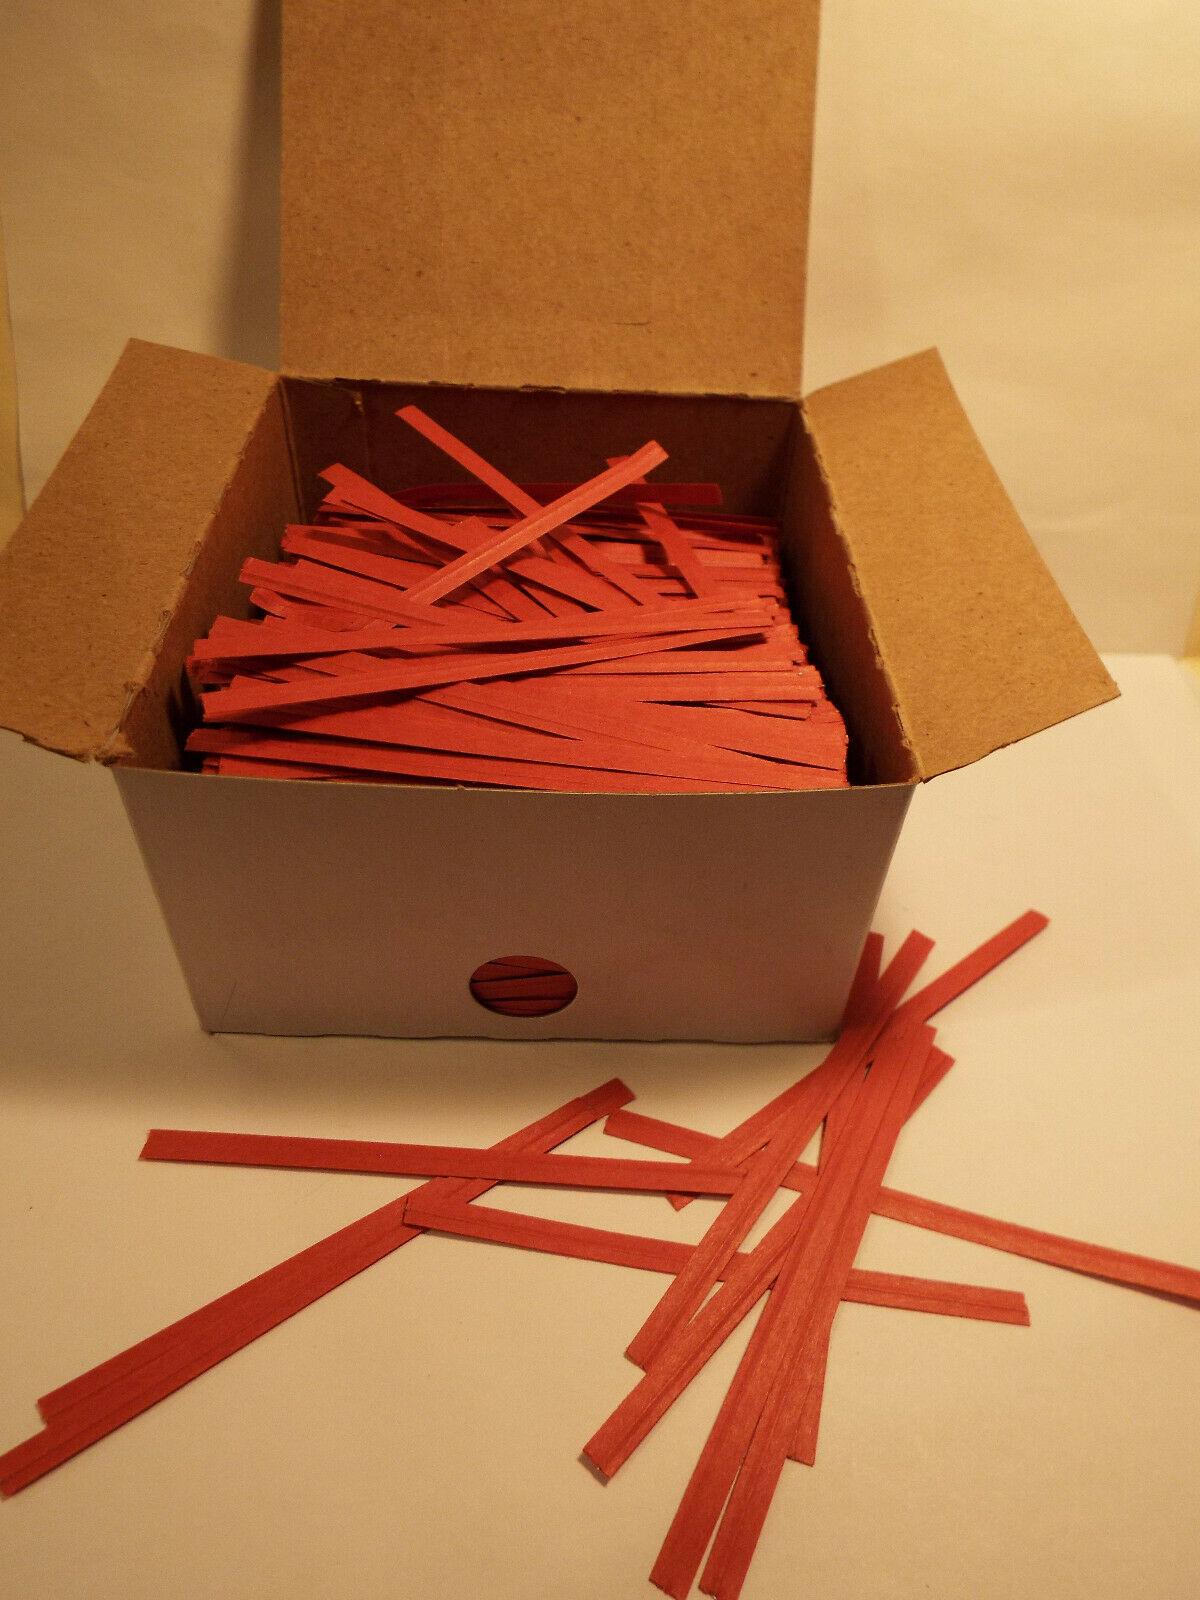 2000 pcs RED PAPER TWIST TIES Gift Bag Bread Candy Paper Over Metal Tie NEW